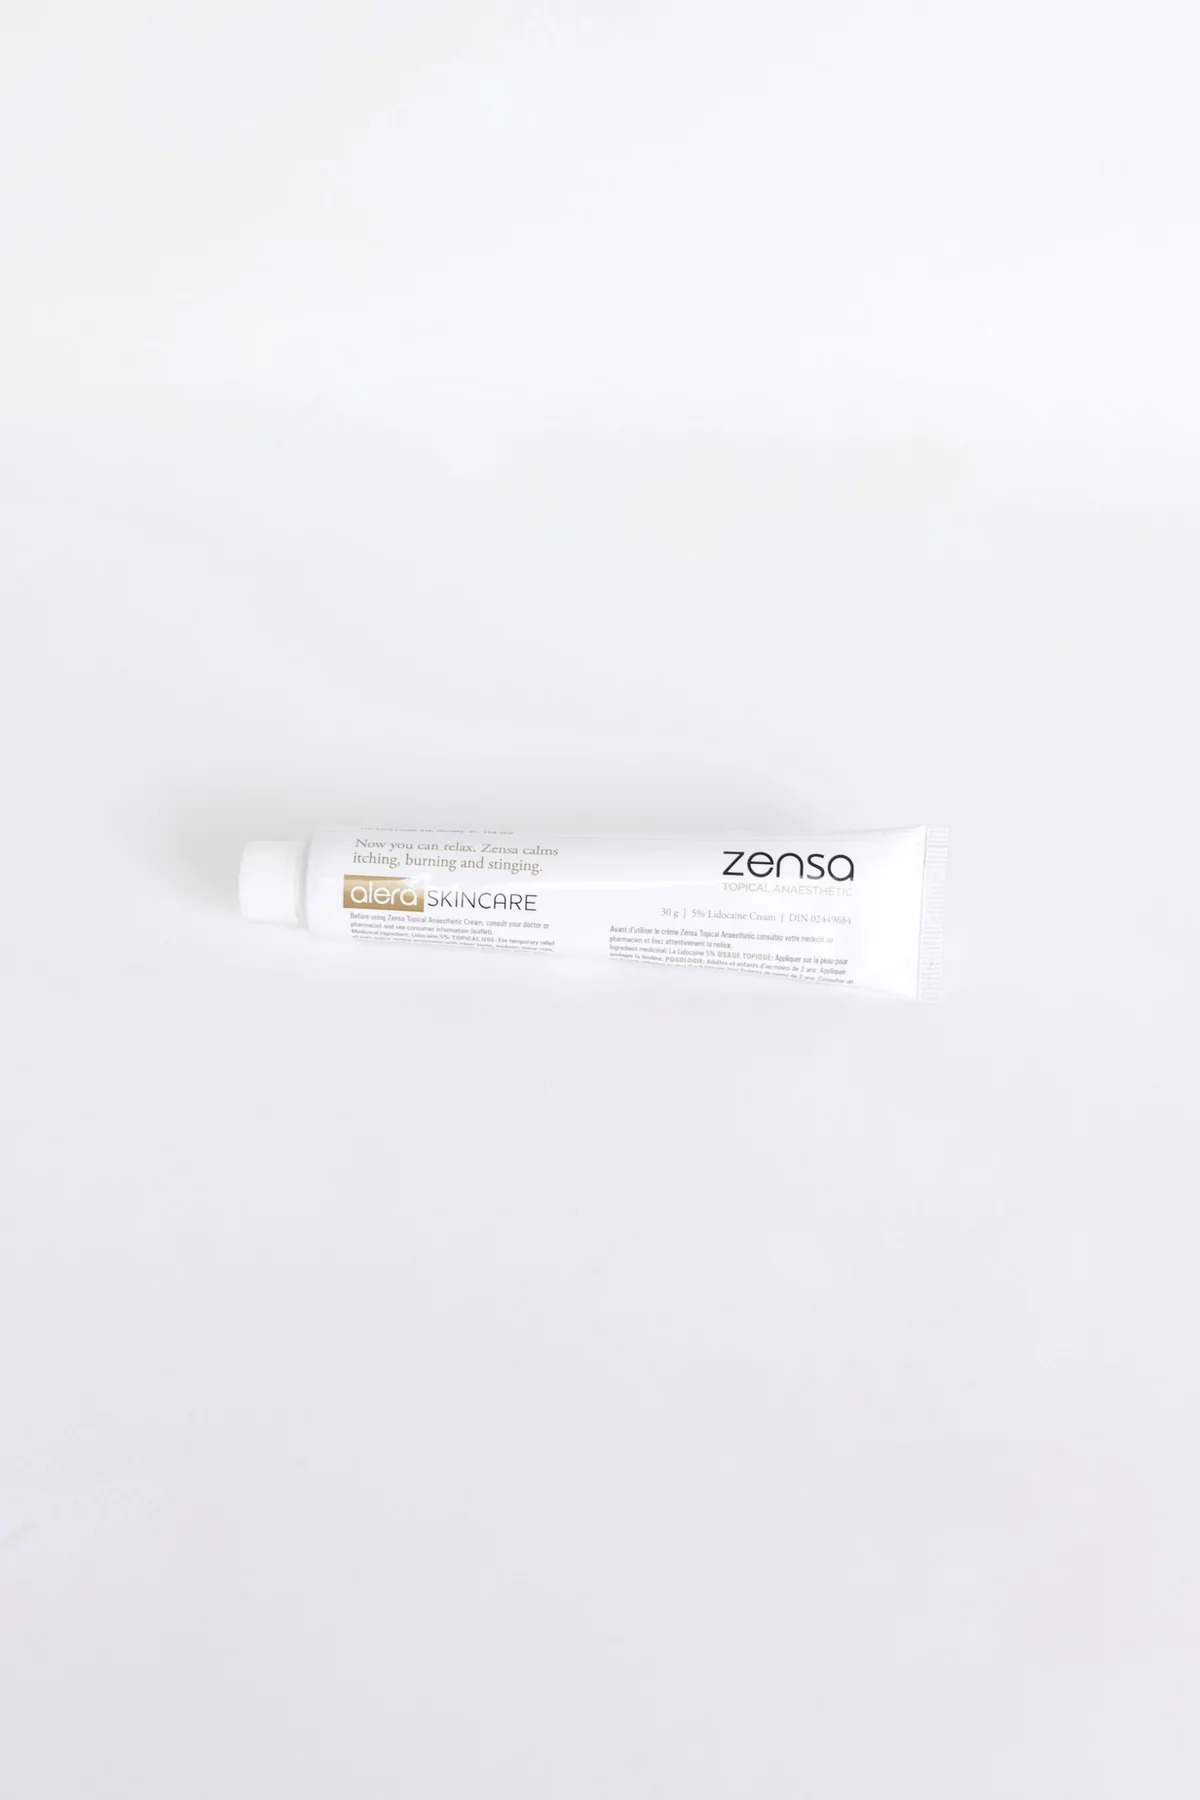 A Guide To The Zensa Numbing Cream